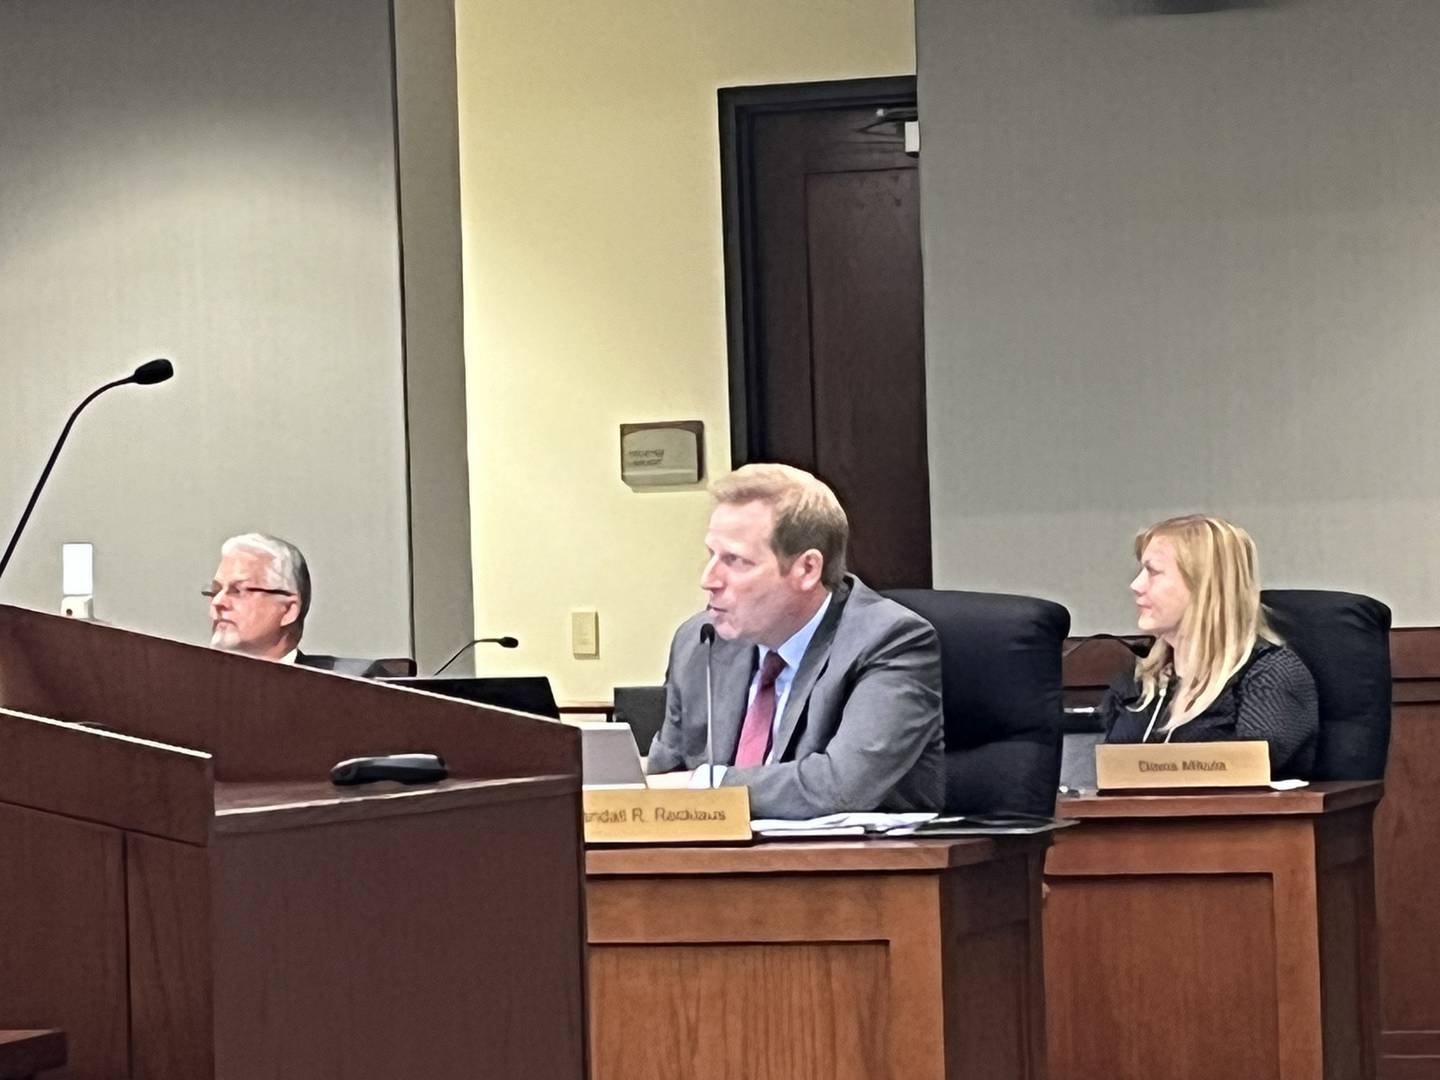 Arlington Heights Village Manager Randy Recklaus speaks during the Oct. 10, 2022 Village Board Committee of the Whole meeting in Arlington Heights, discussing the Chicago Bears' proposed redevelopment of Arlington International Racecourse.